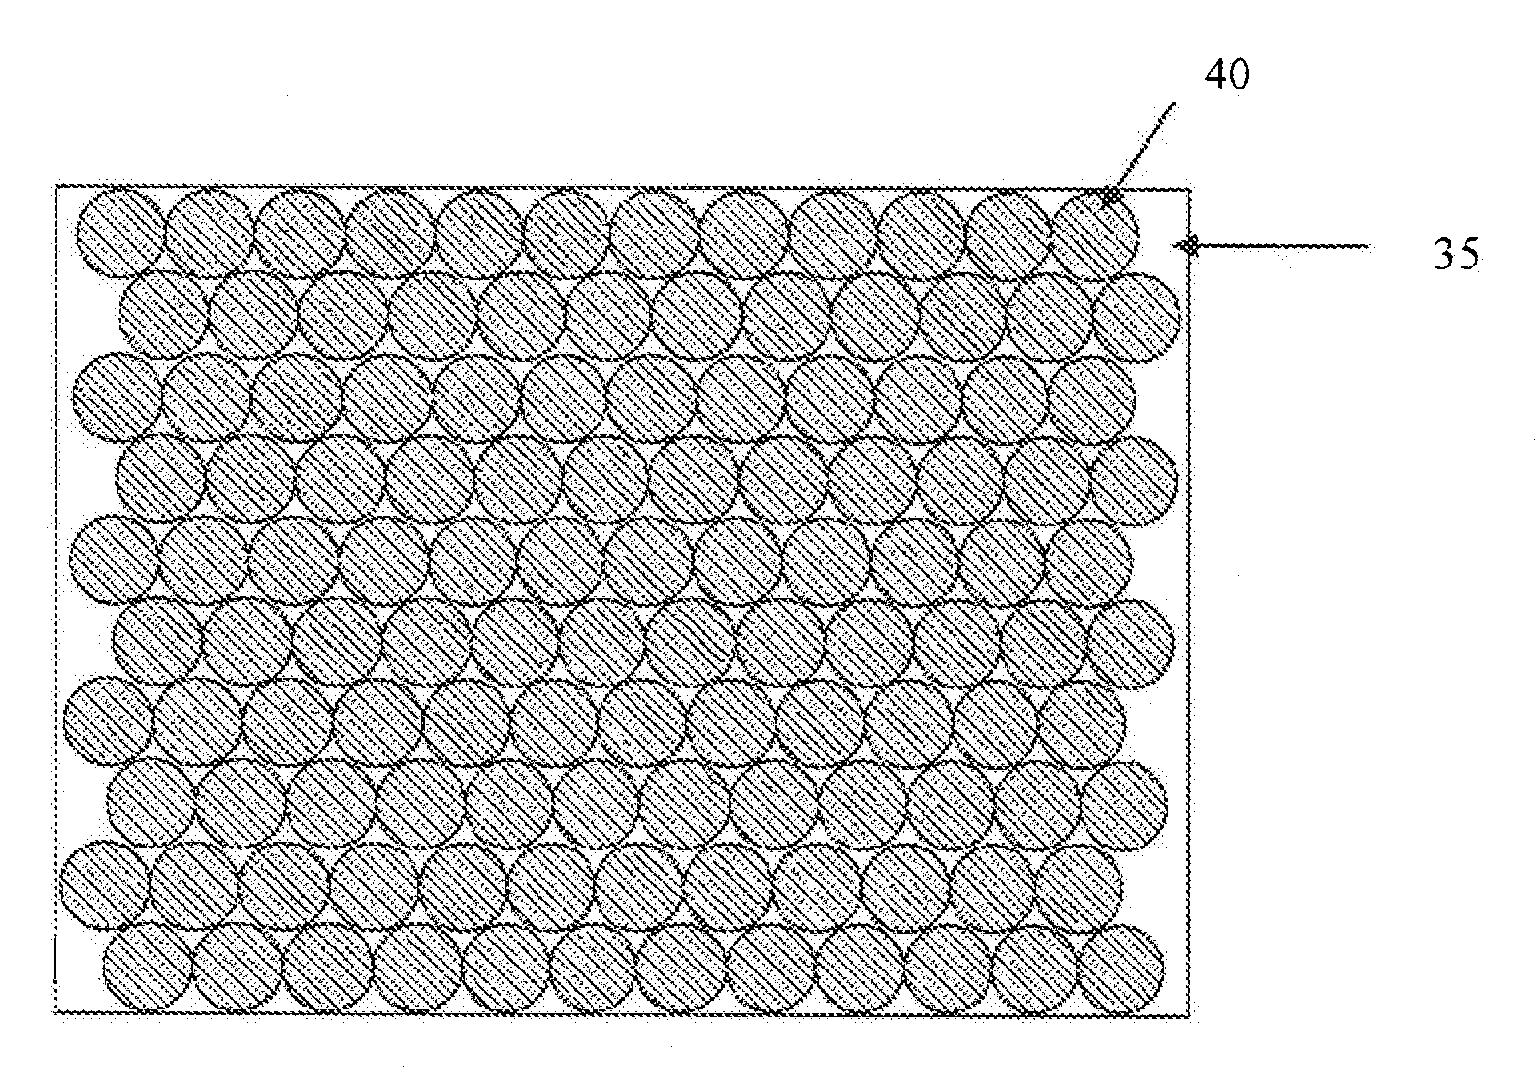 Method for fabricating micro and NANO structures